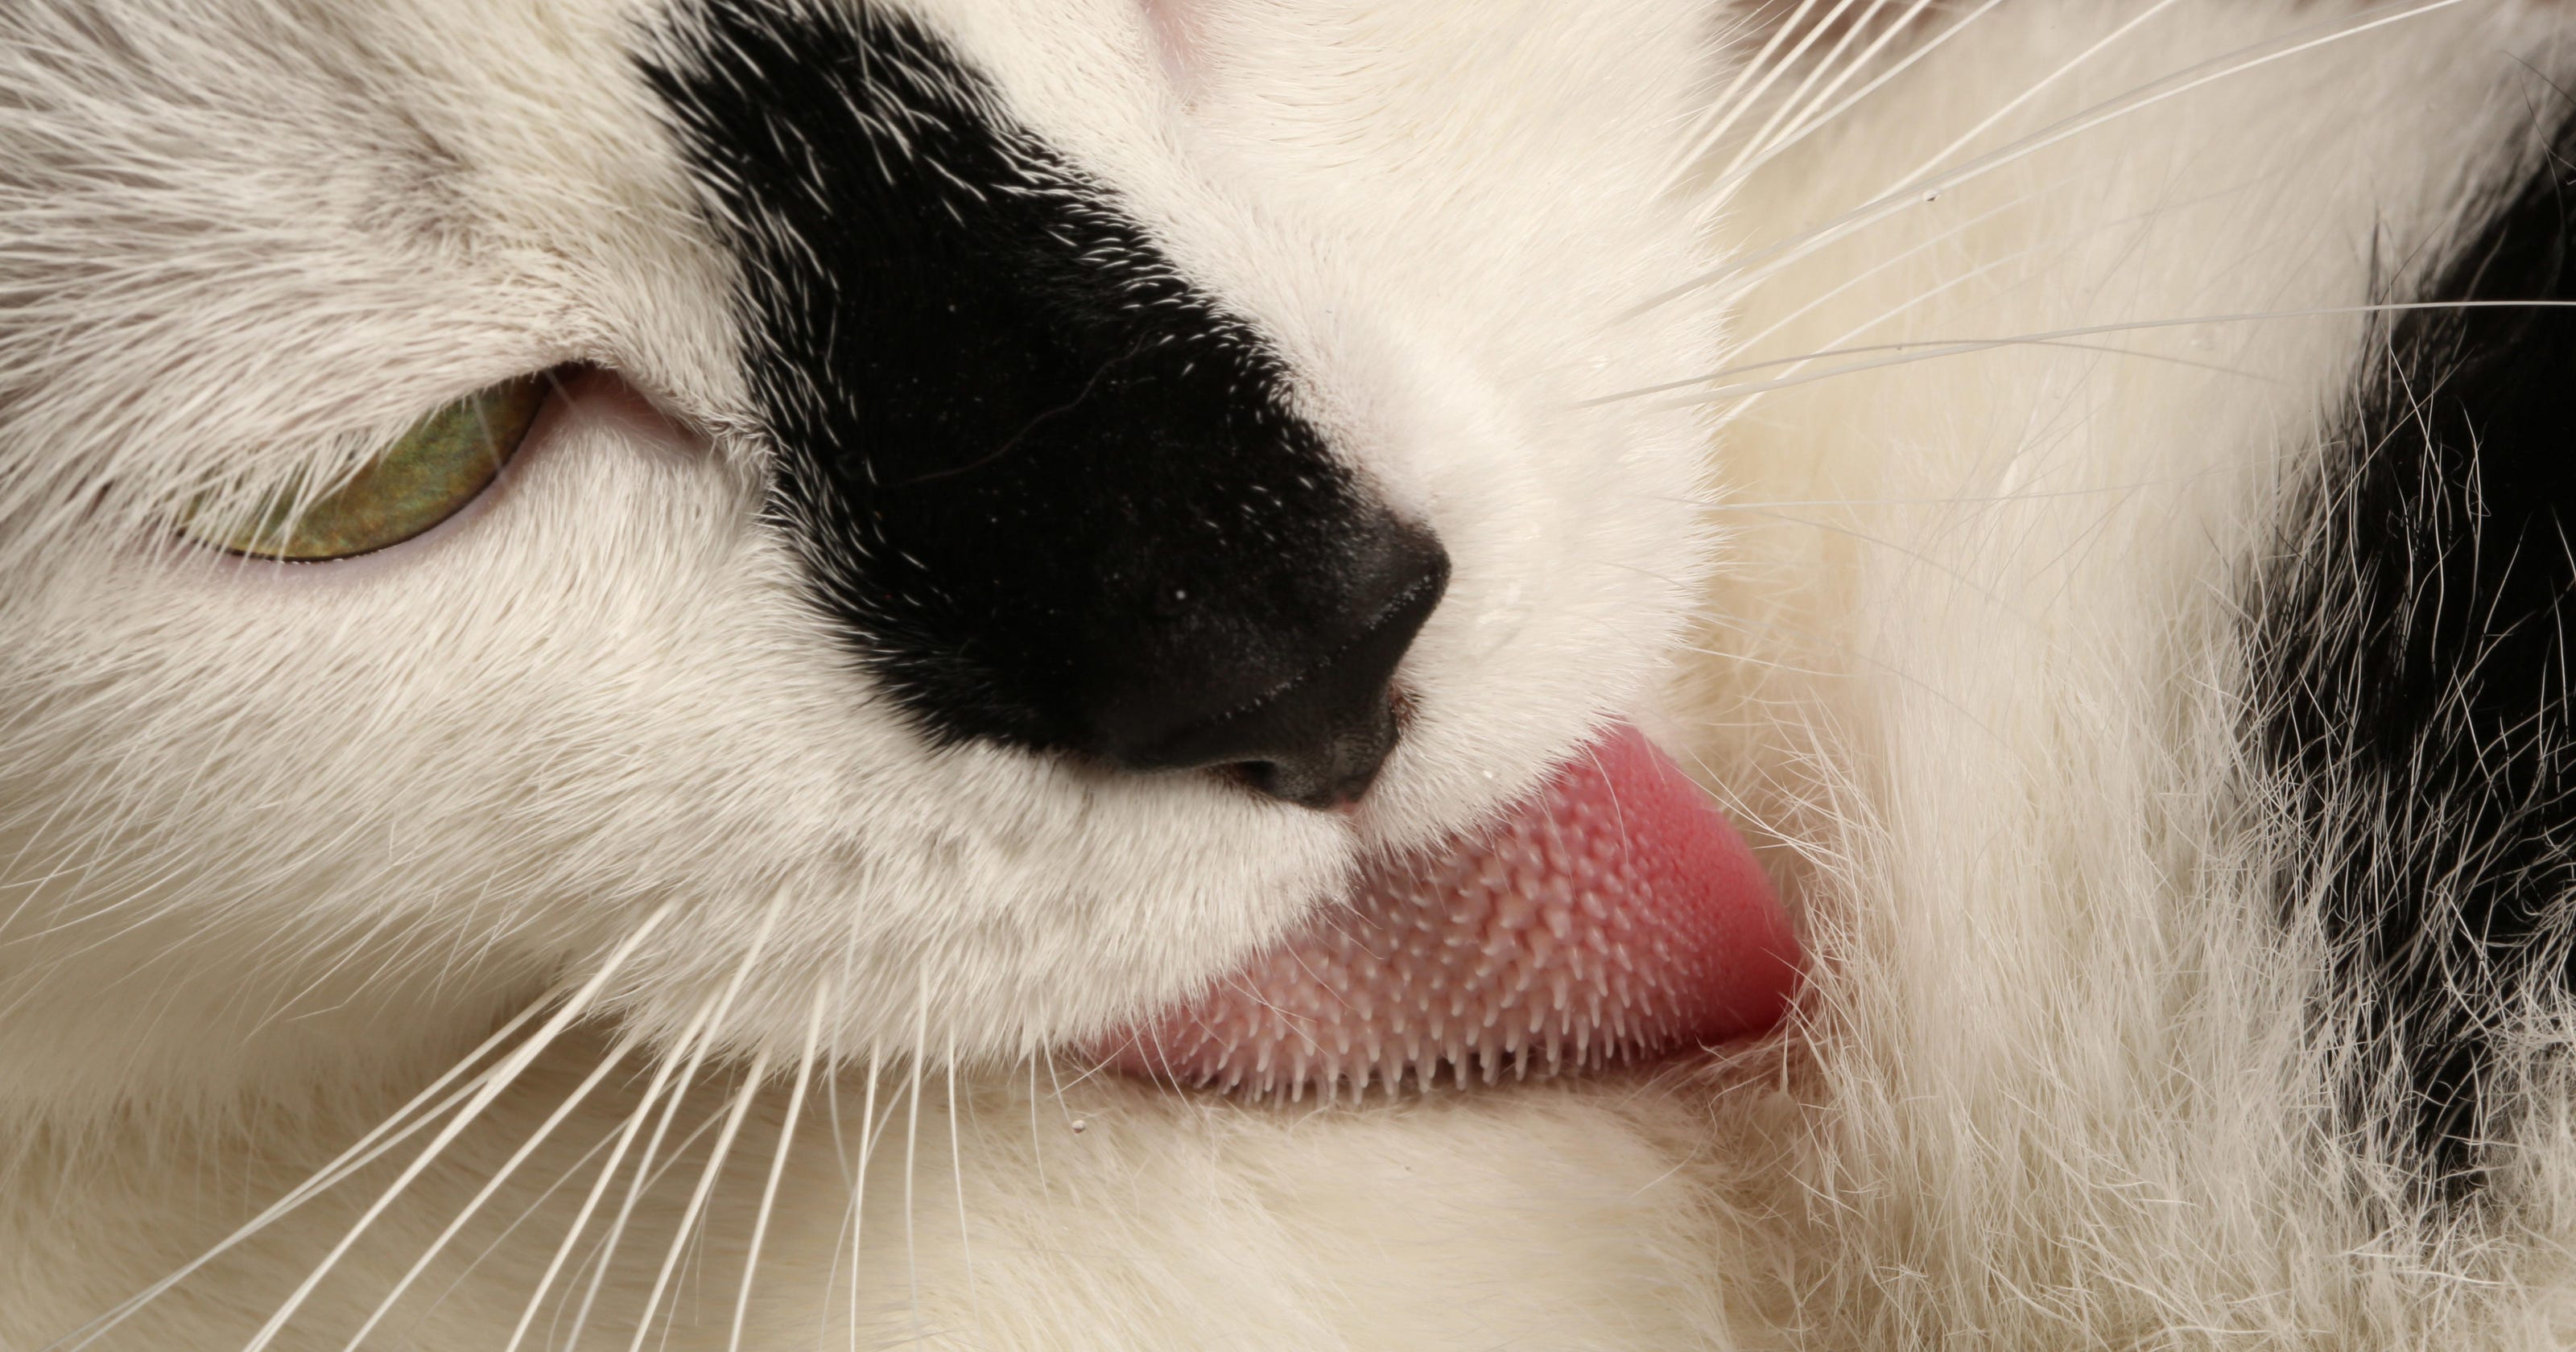 Why Cats Have Scratchy Tongues